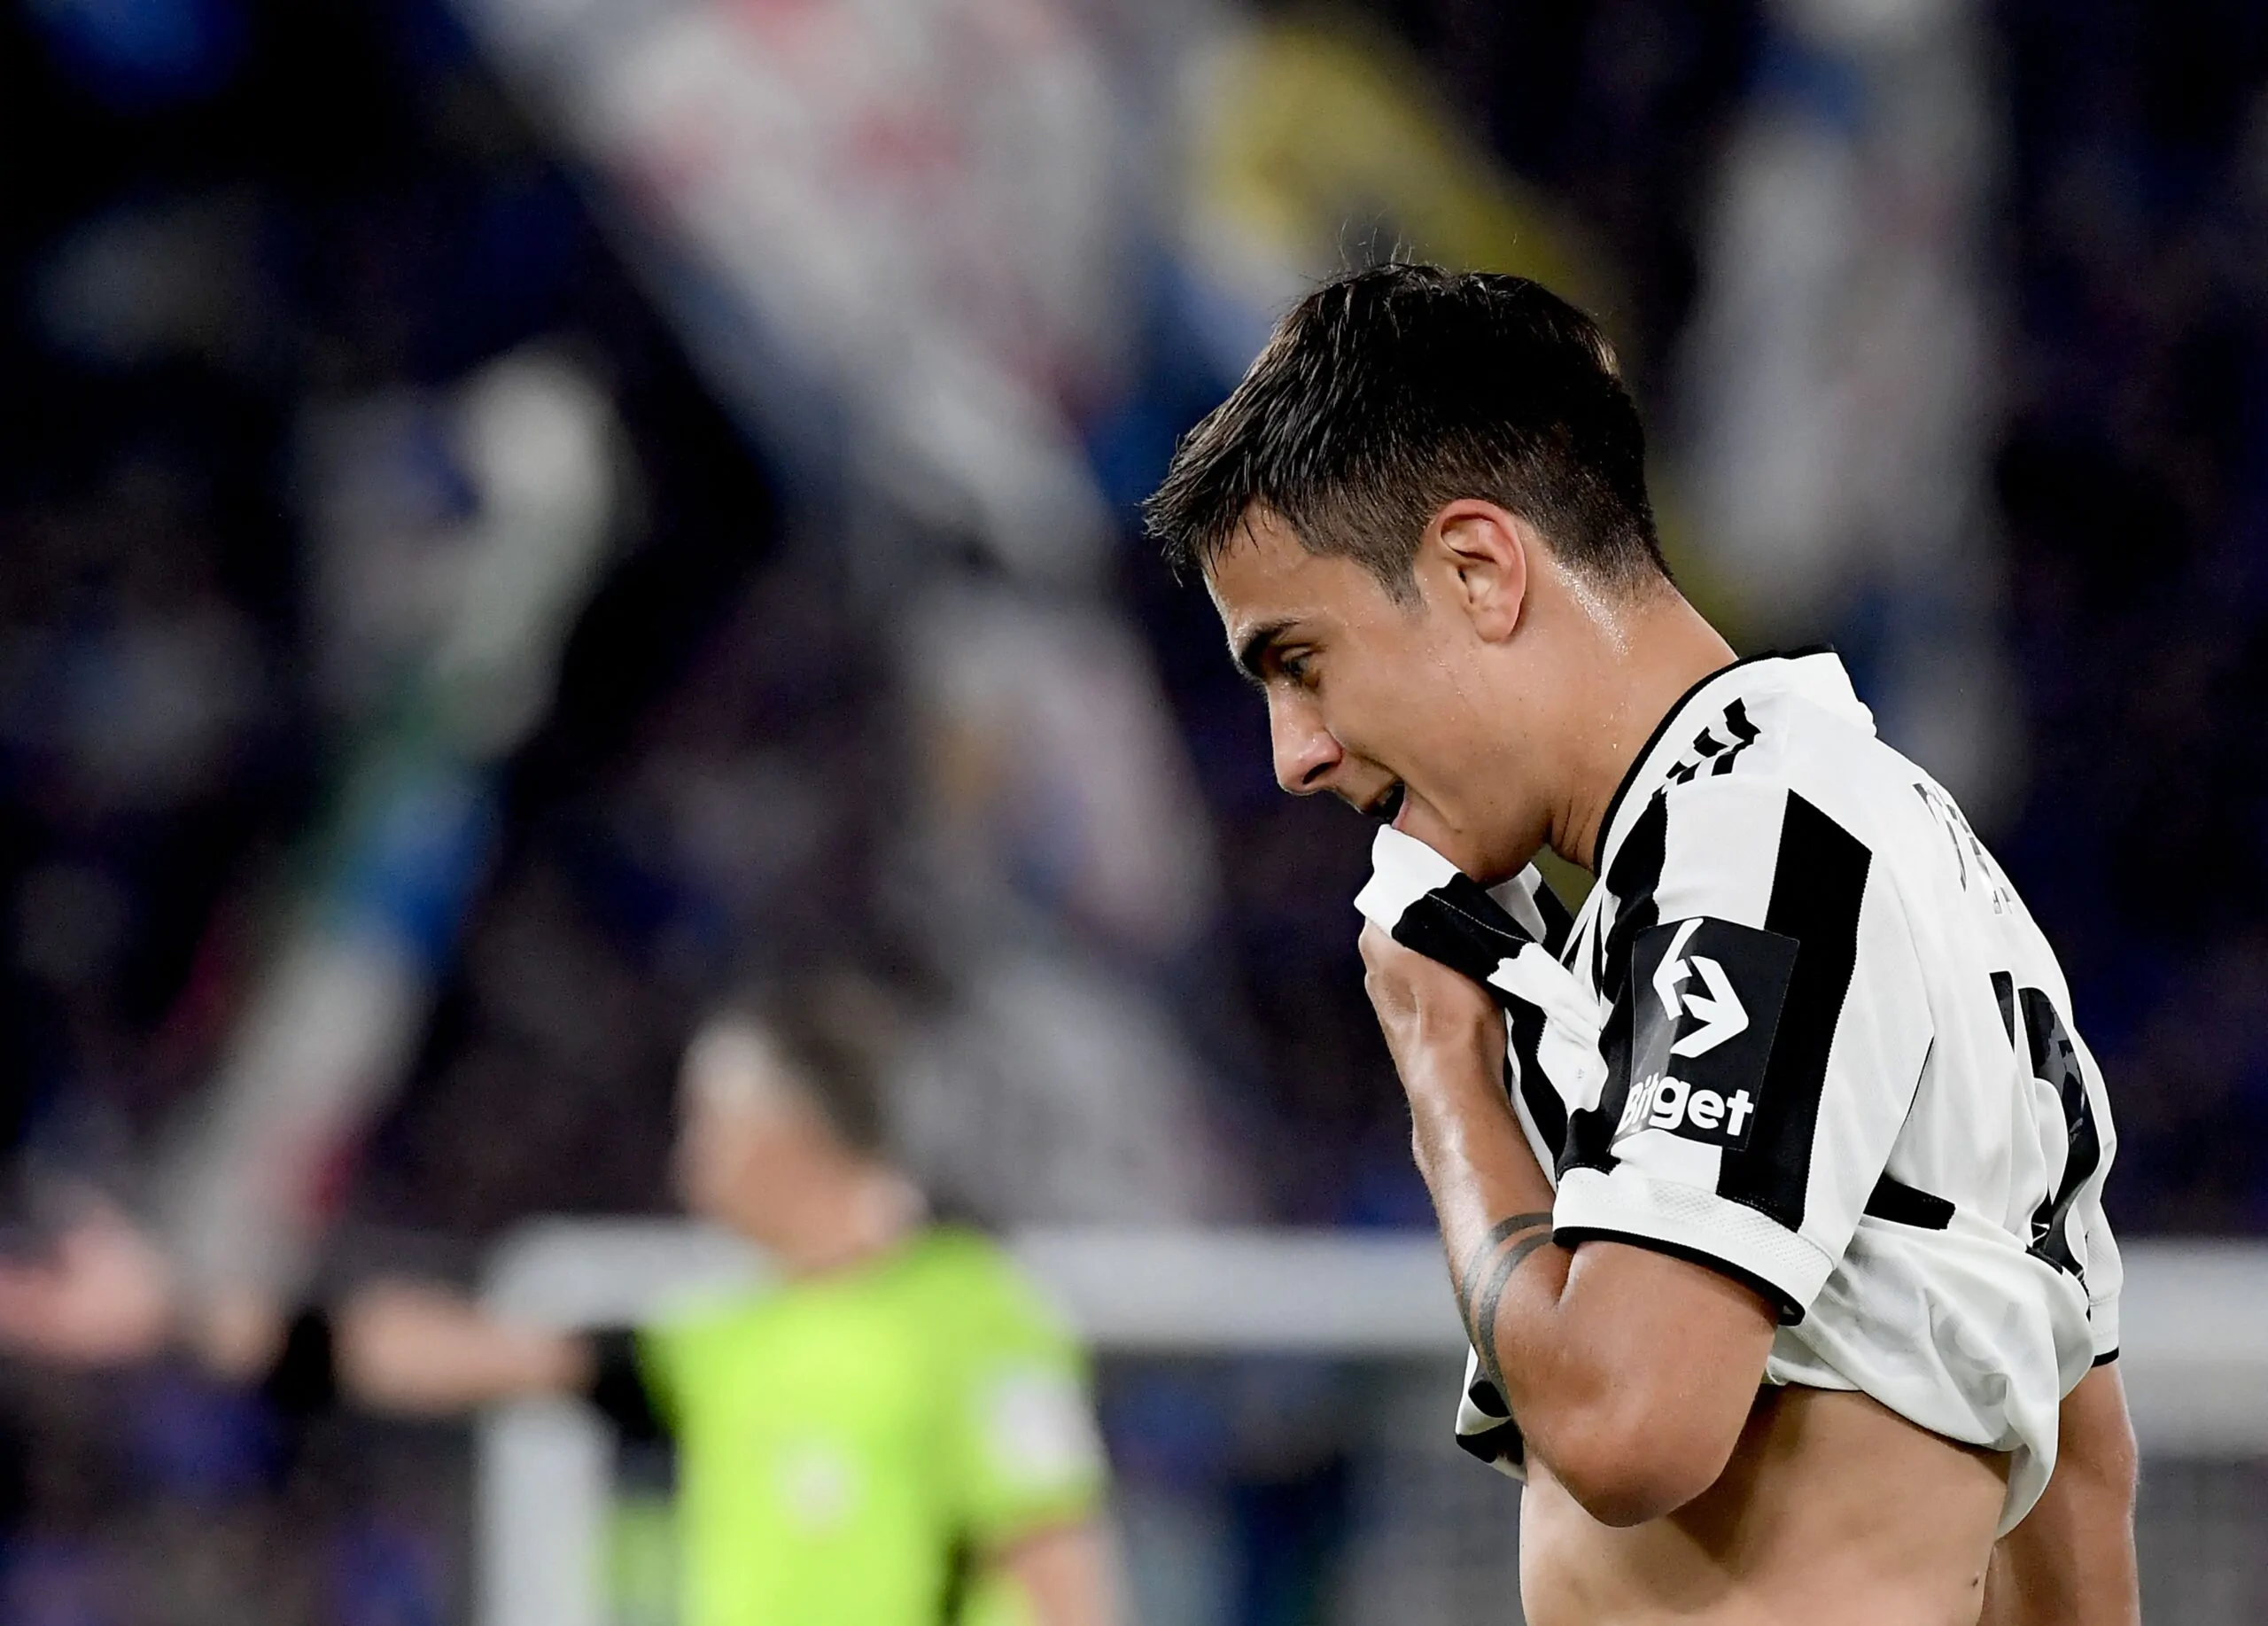 Calciomercato Inter, Dybala in stand by: le ultime